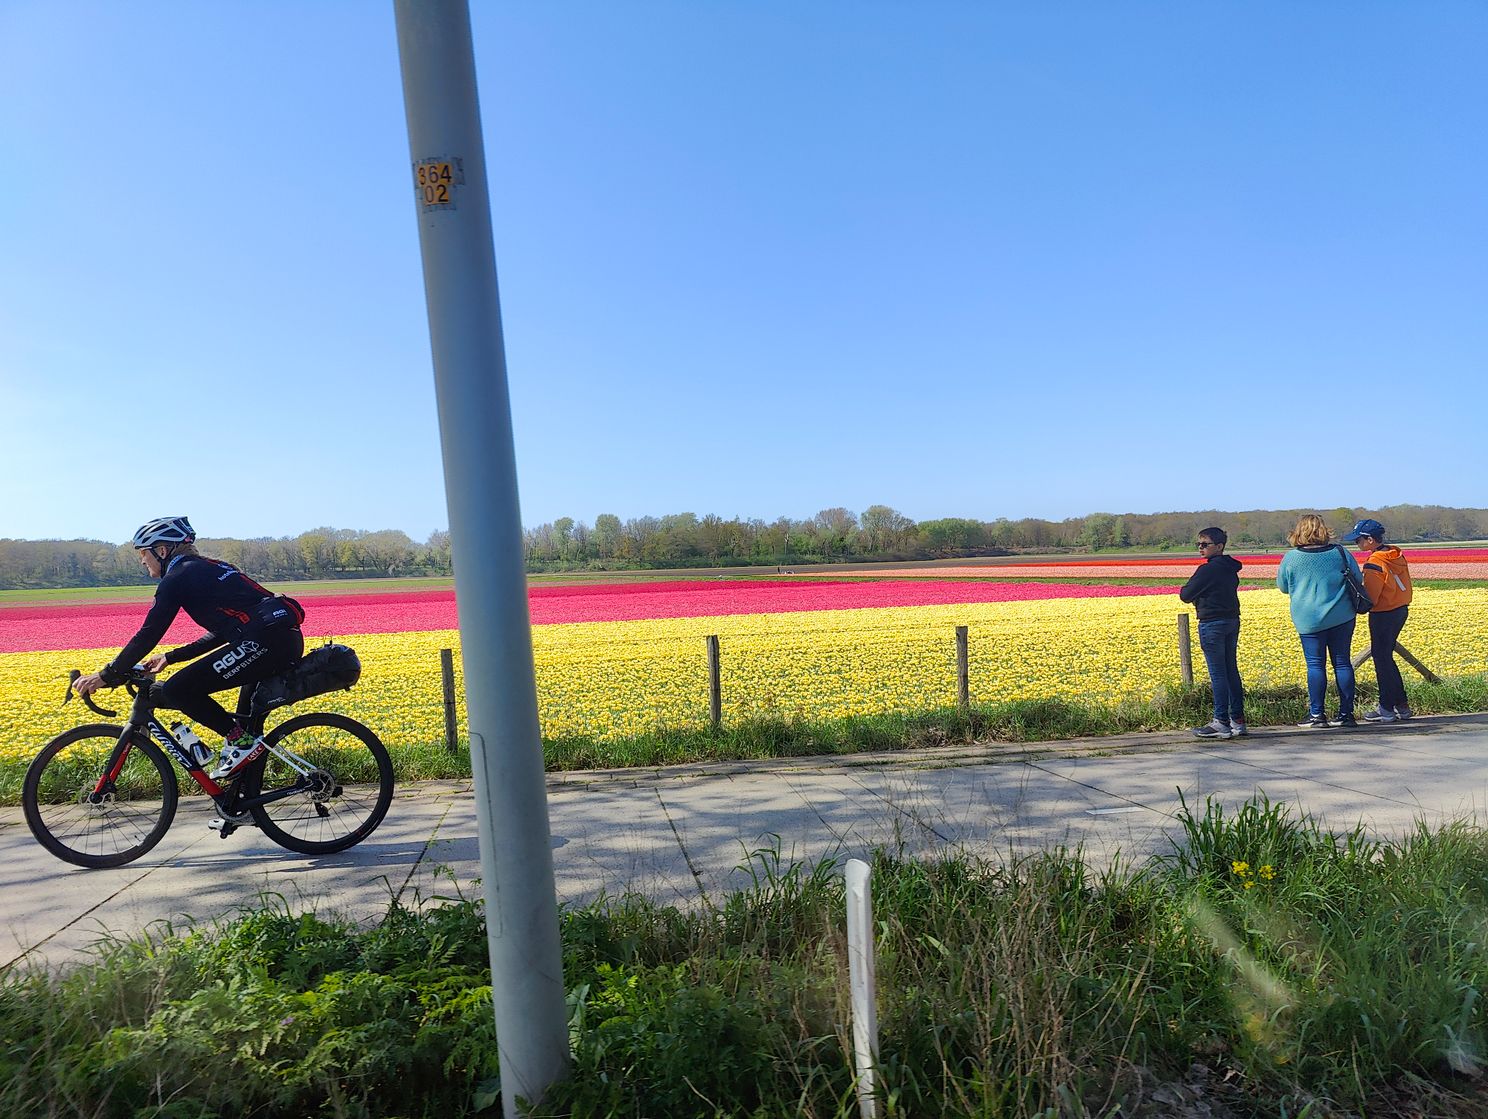 It is that there are beautiful bulb fields to see, but where is this cyclist going?